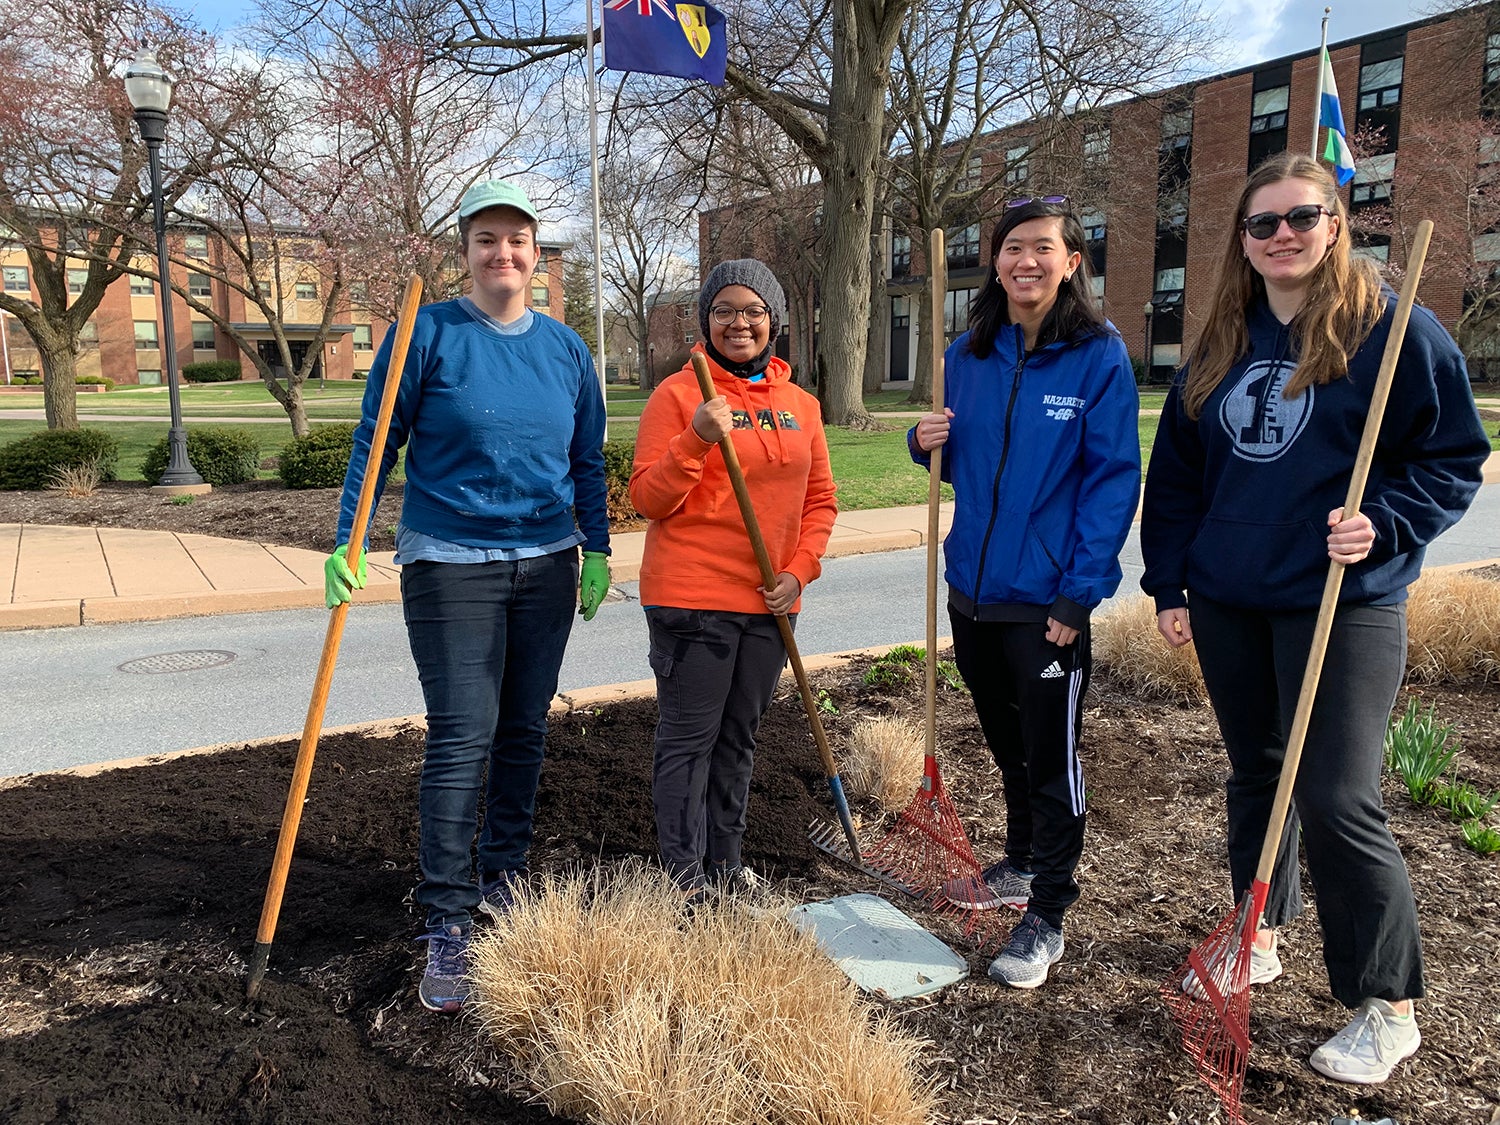 Students spread mulch as part of a campus cleanup.